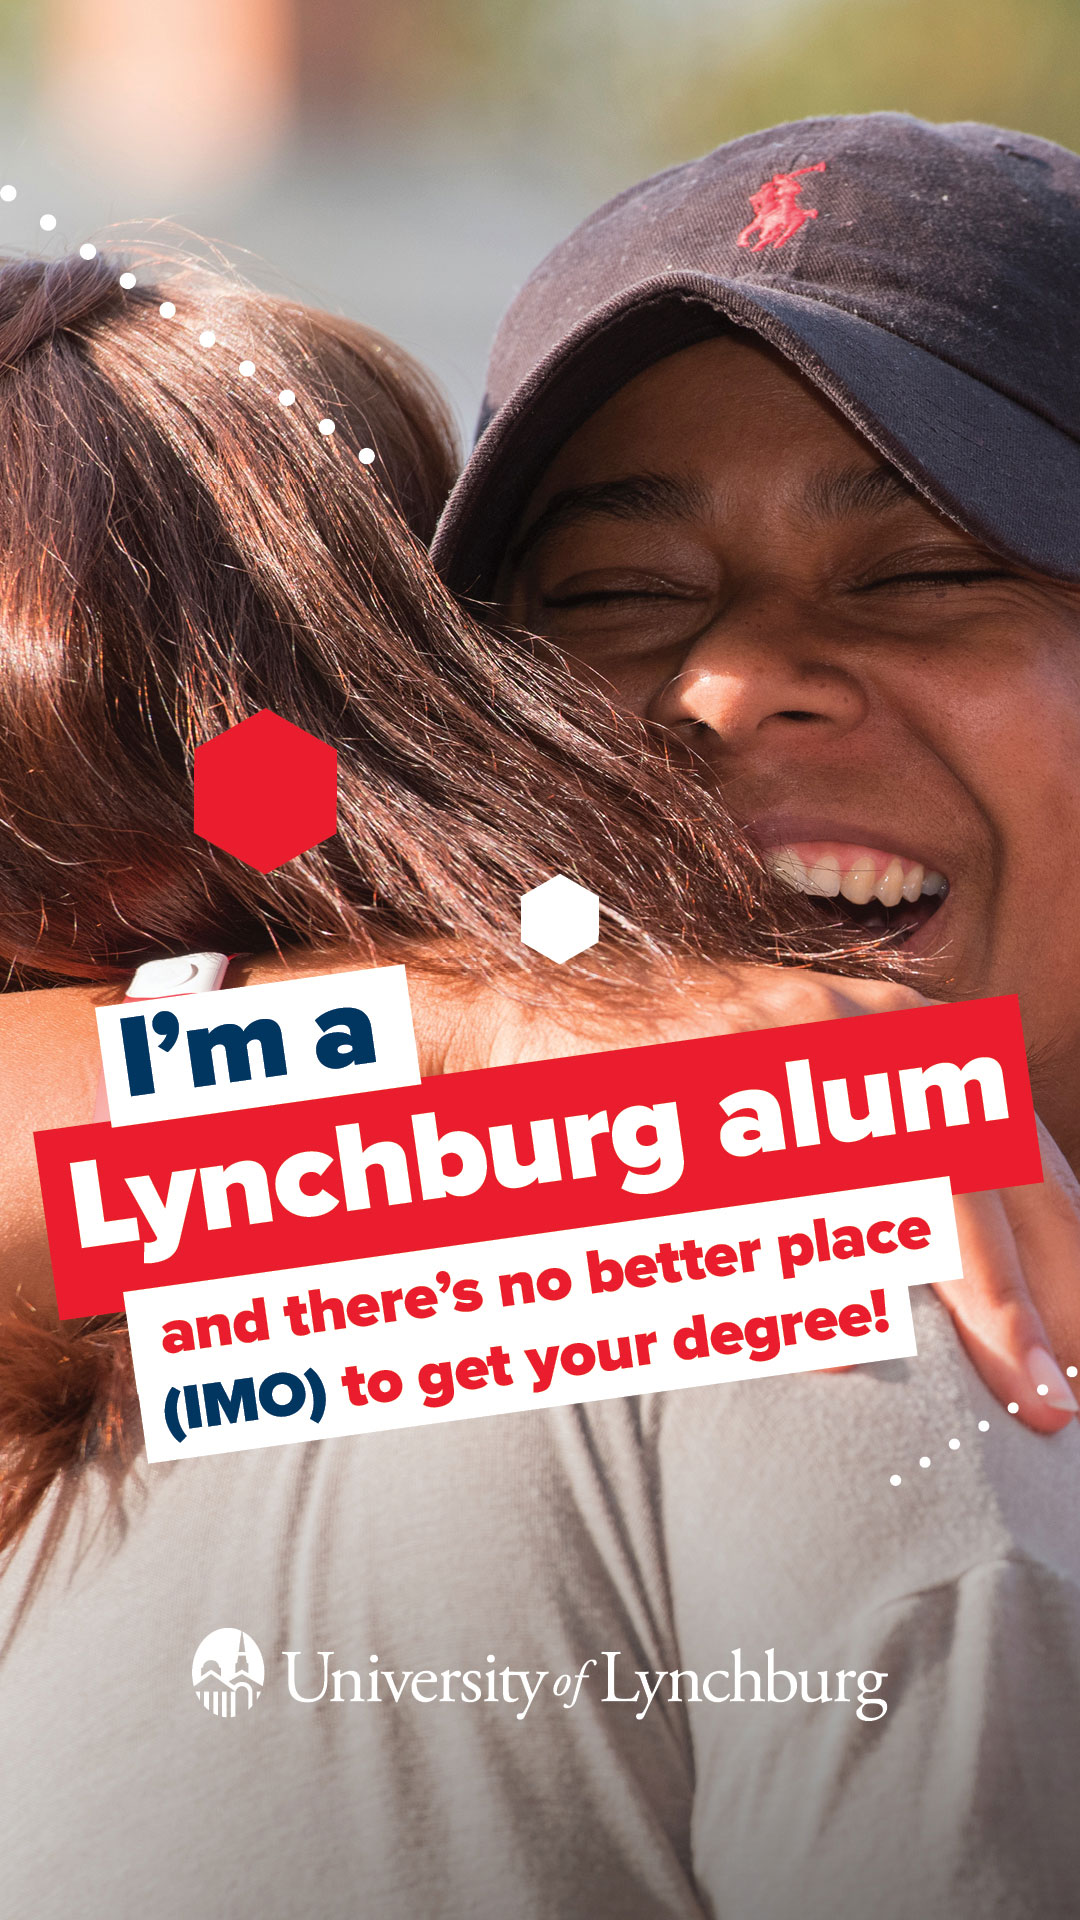 A photo of happy student hugging, with the following text: I'm a Lynchburg alum and there's no better place (IMO) to get your degree! University of Lynchburg